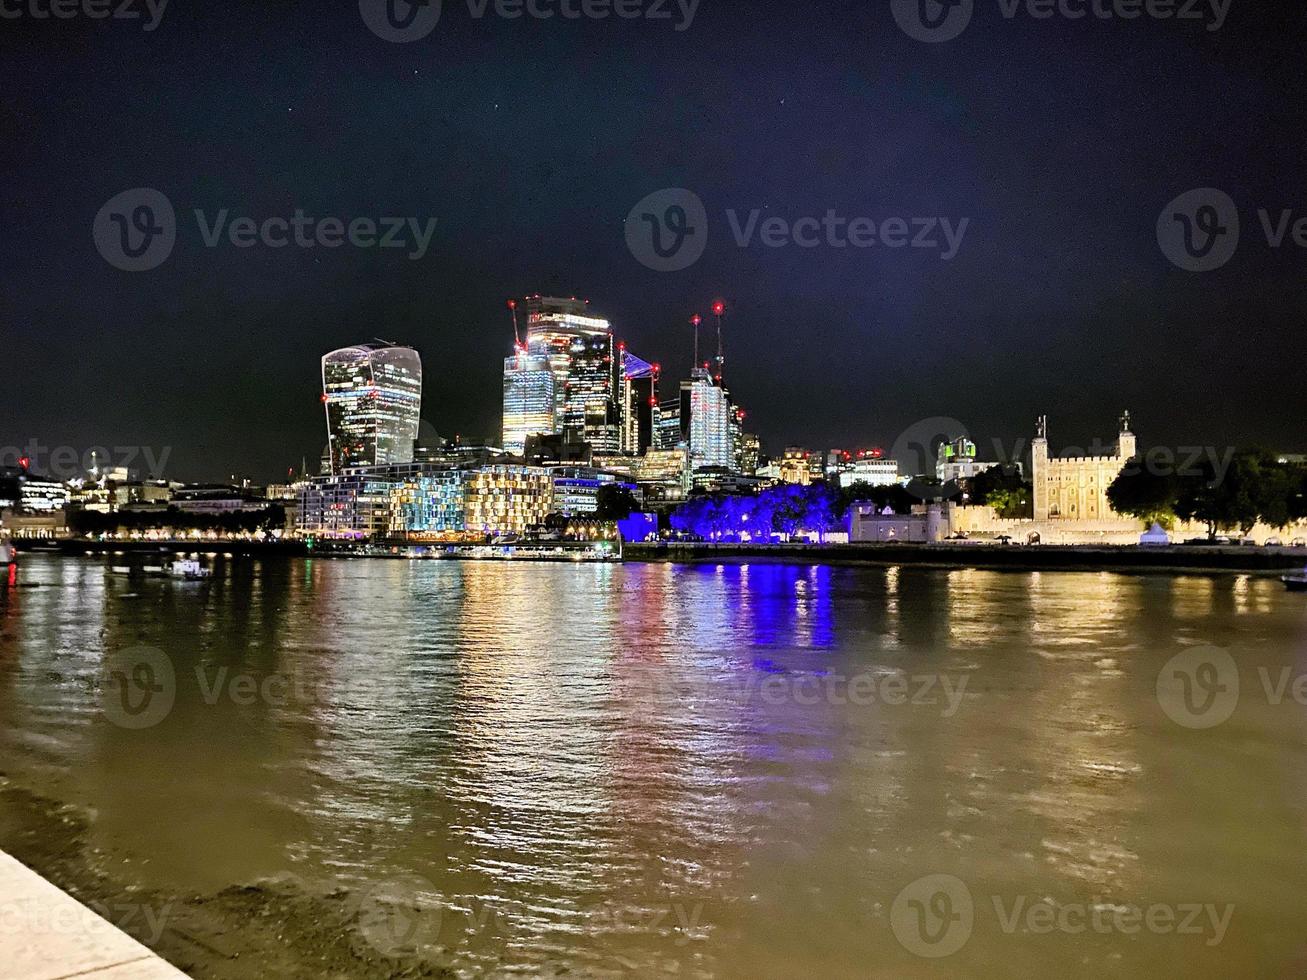 A view of the River Thames in London at night photo